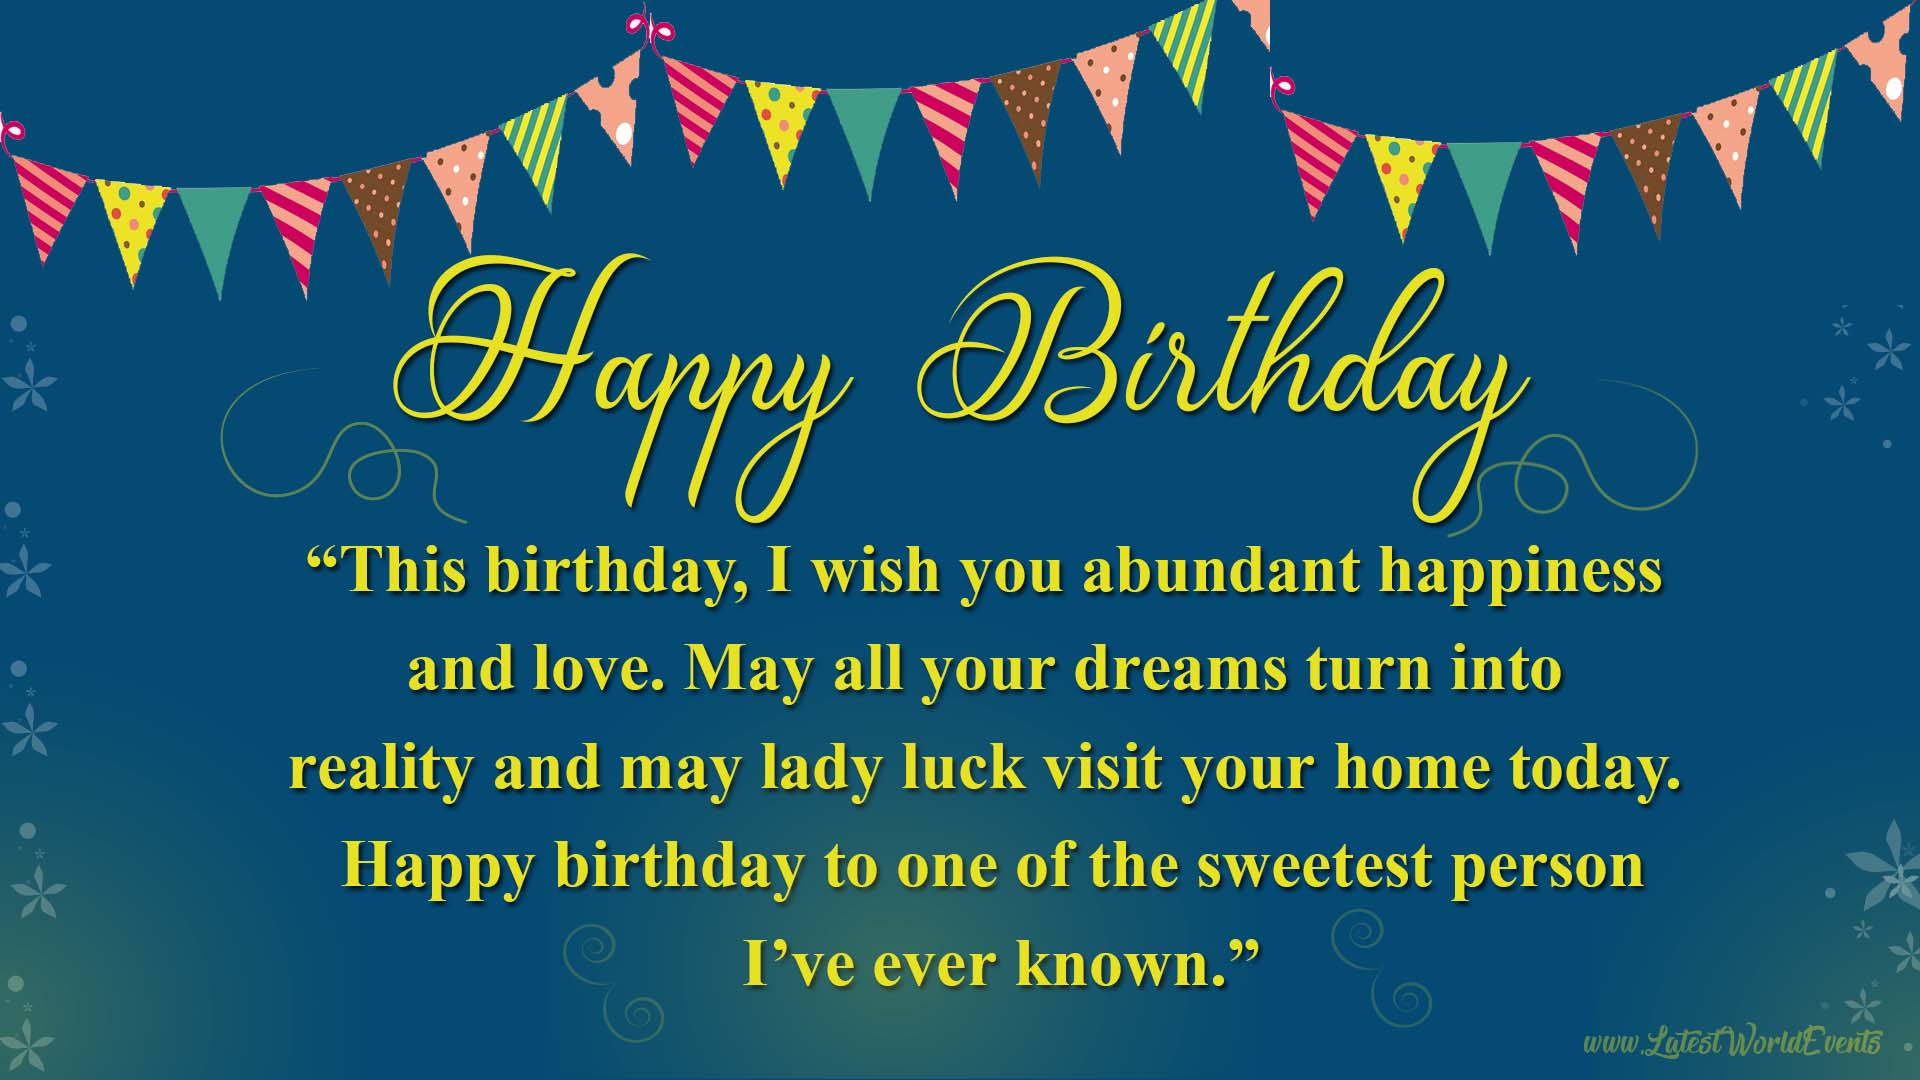 Download-happy-birthday-wishes-wallpapers